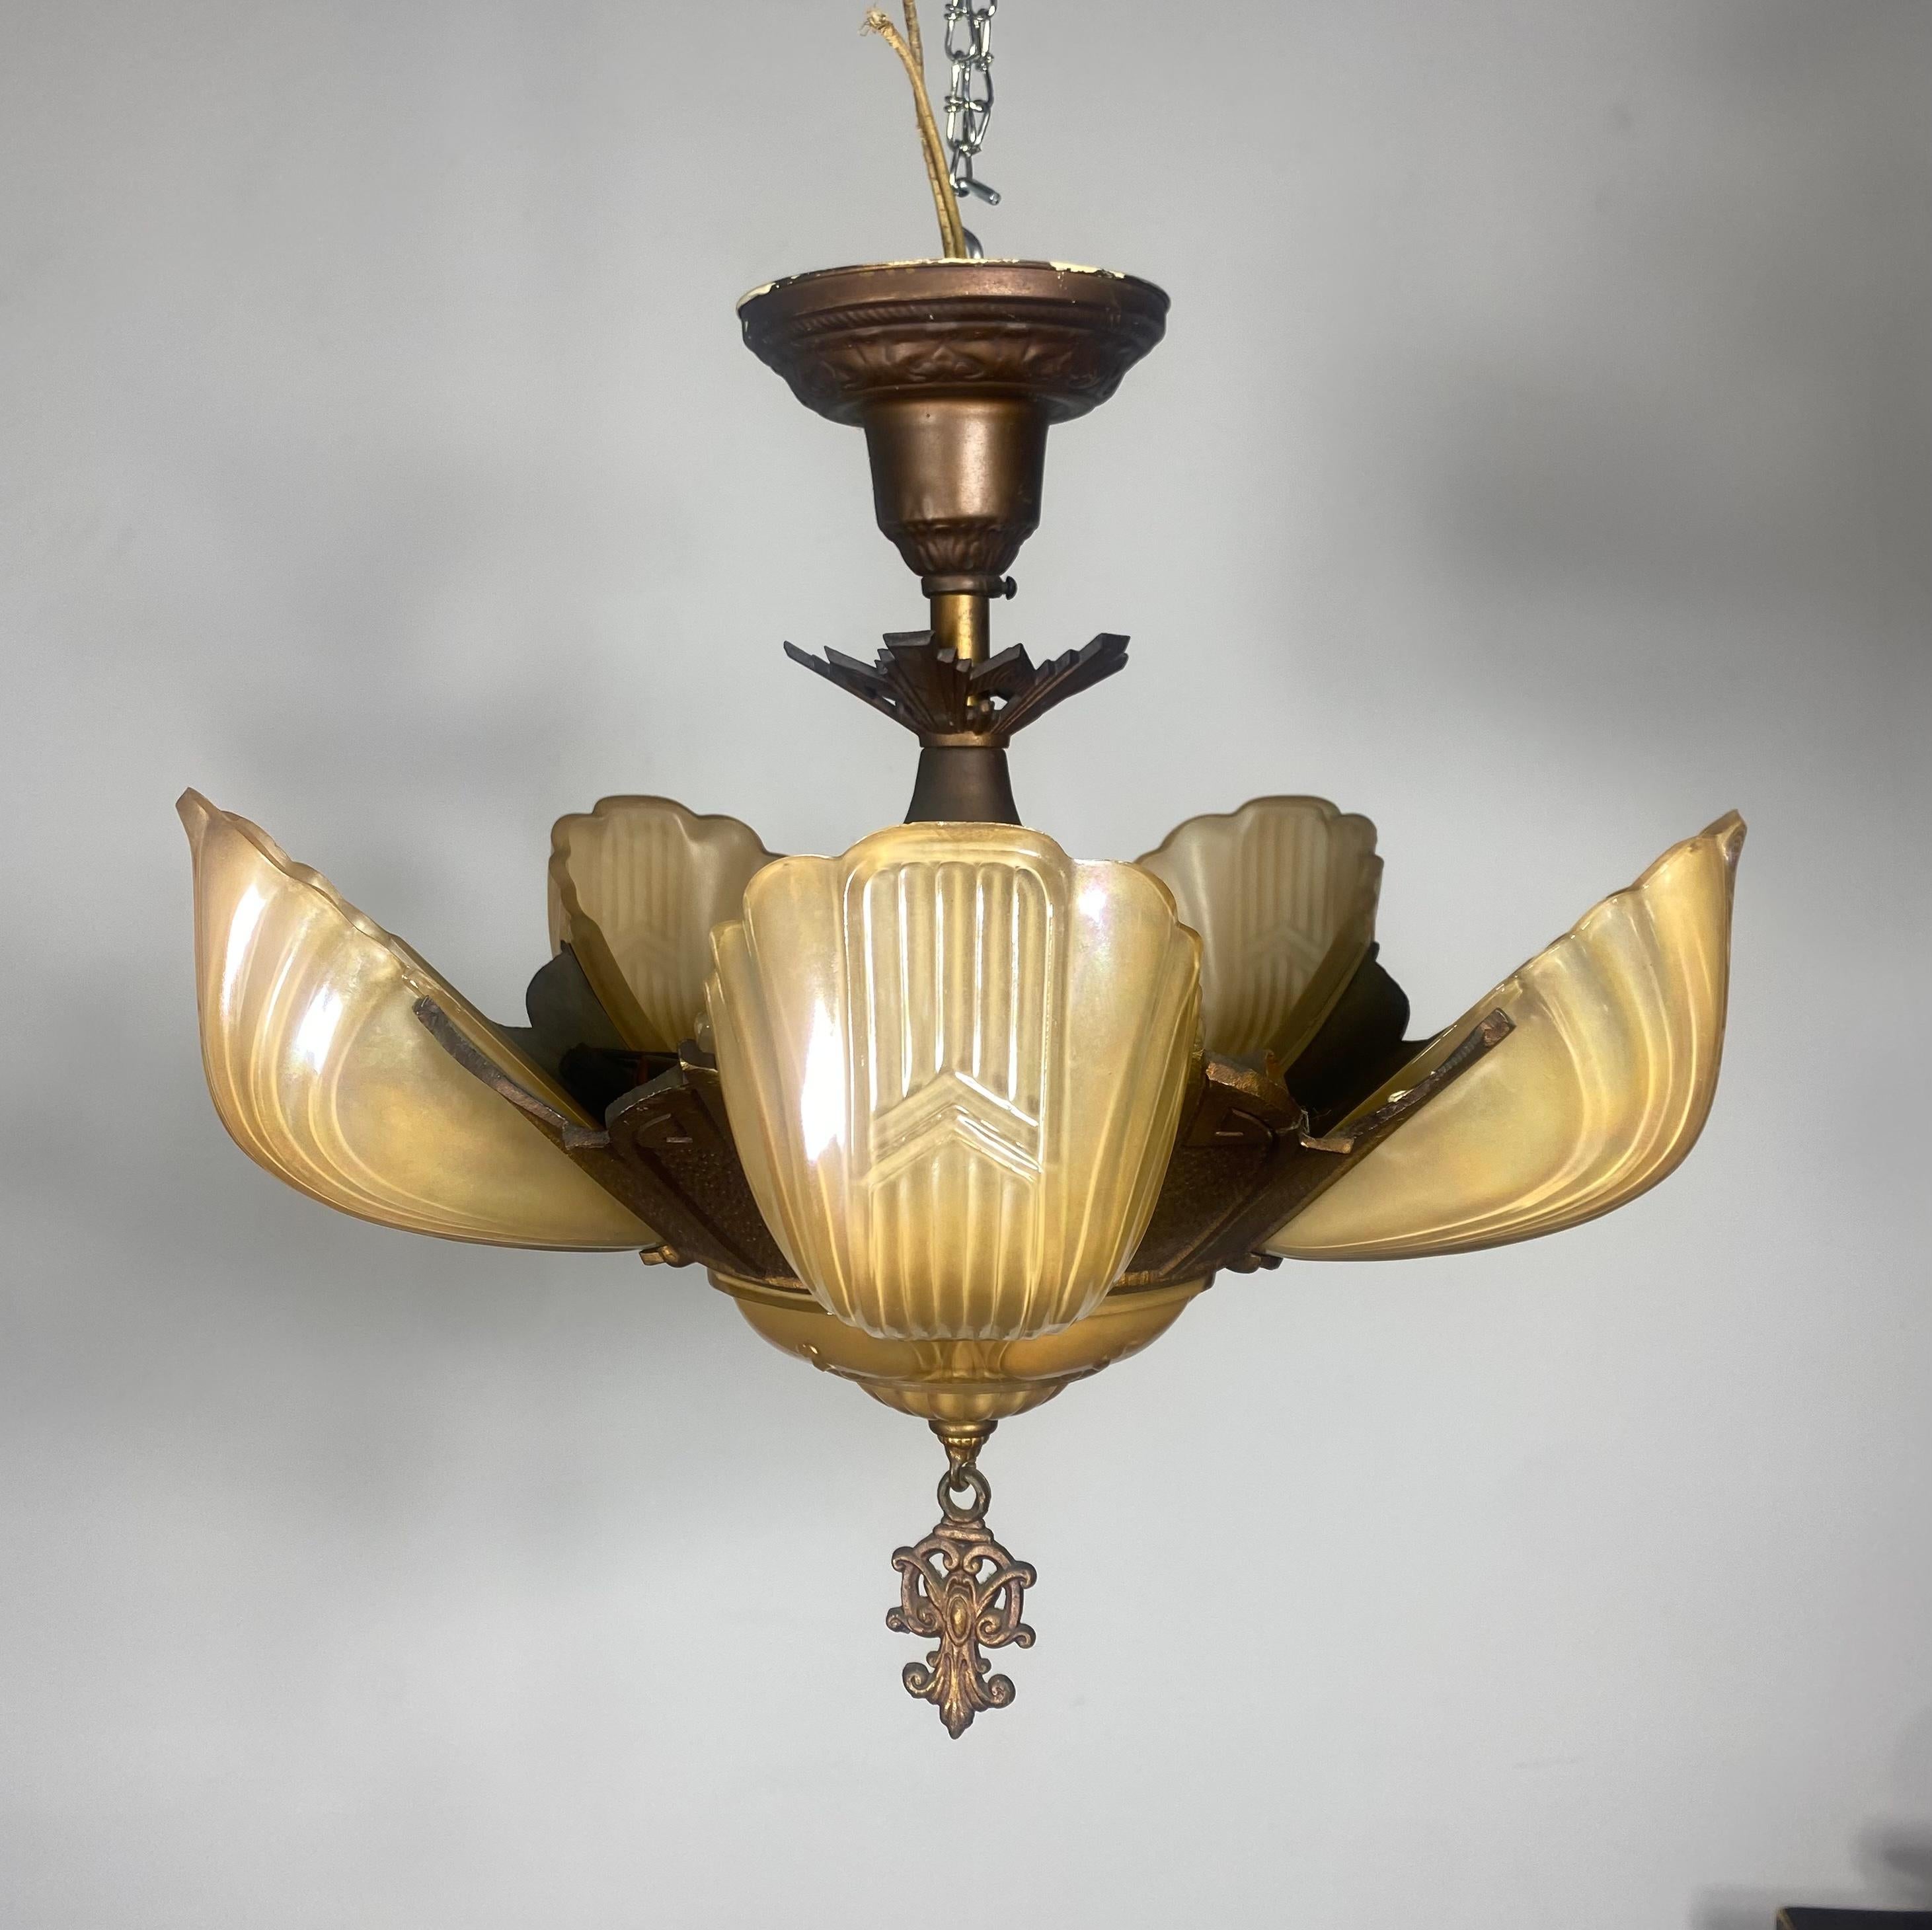 Slip Shade Art Deco Chandelier, Spelter with Antique Bronze Patina In Good Condition For Sale In Buffalo, NY